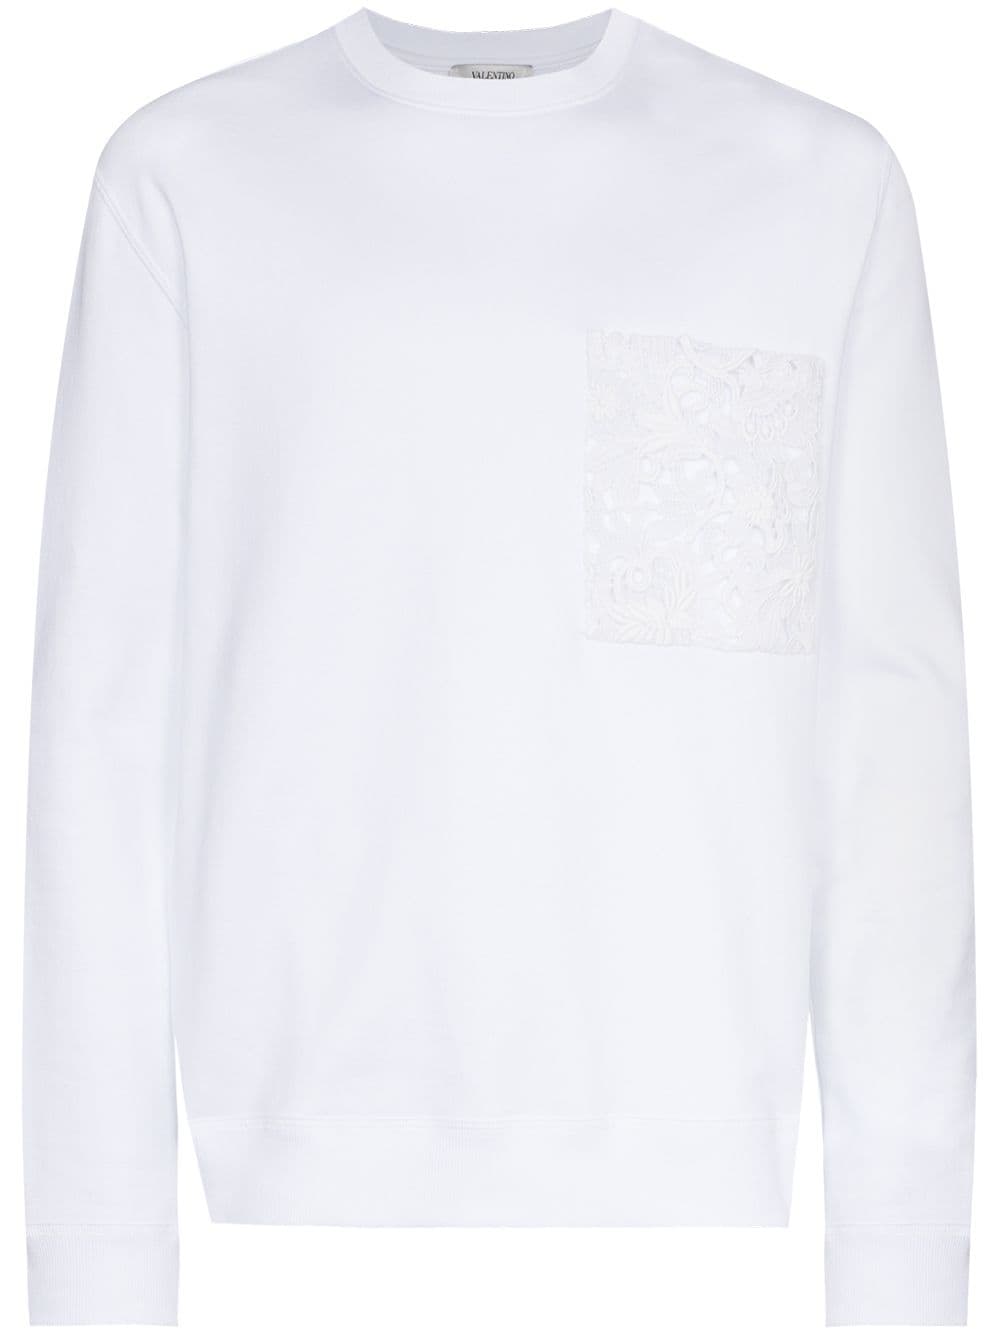 Shop Valentino lace pocket sweatshirt with Express Delivery - FARFETCH